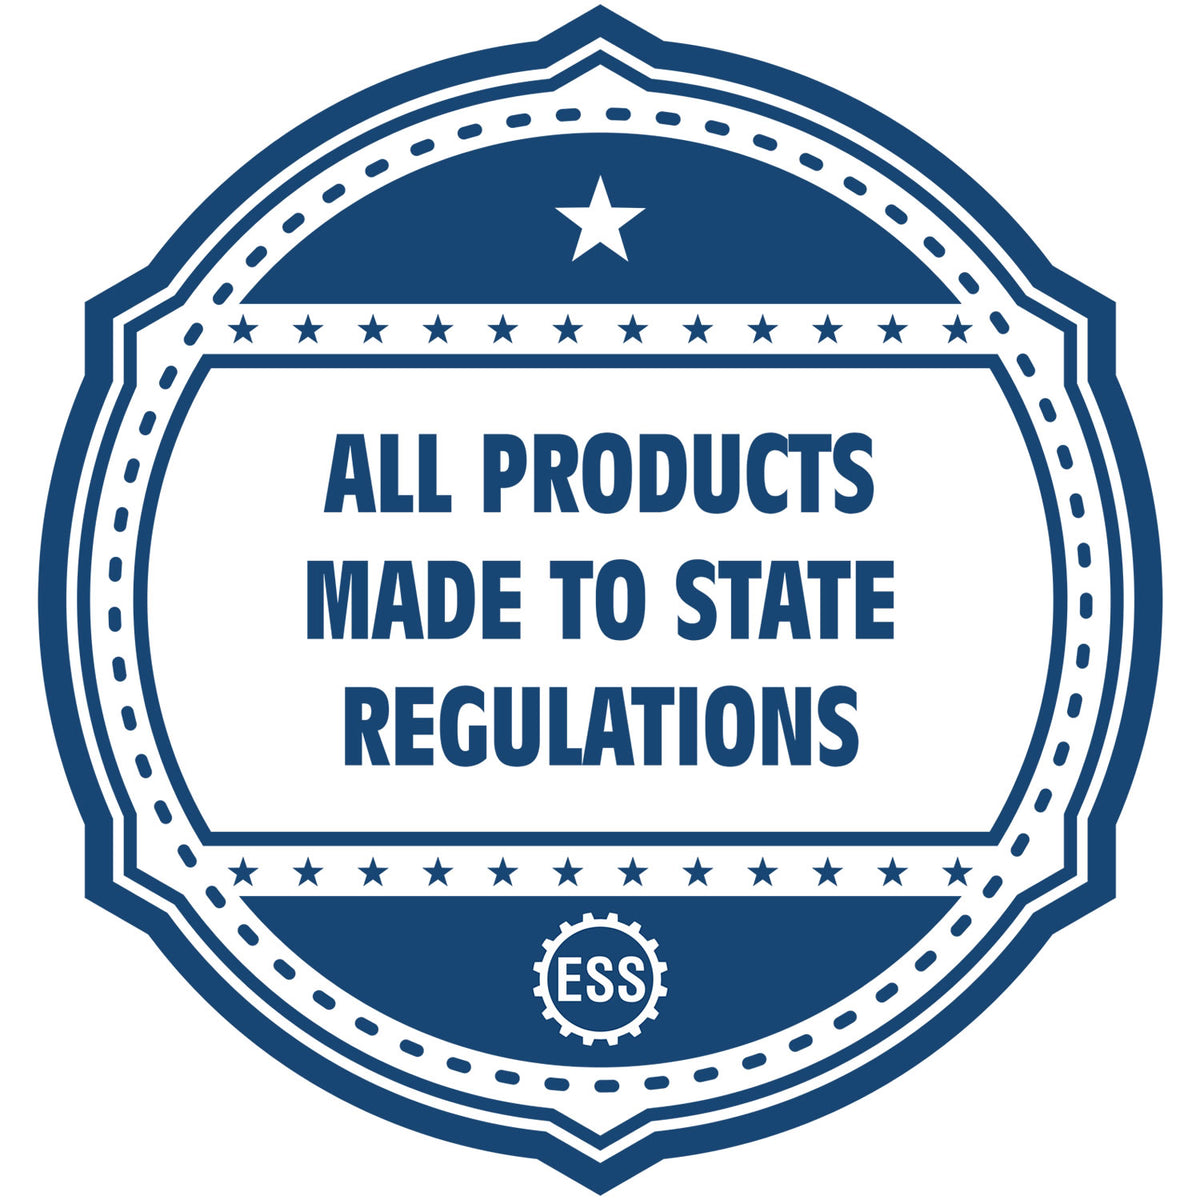 An icon or badge element for the Self-Inking State Seal Louisiana Notary Stamp showing that this product is made in compliance with state regulations.